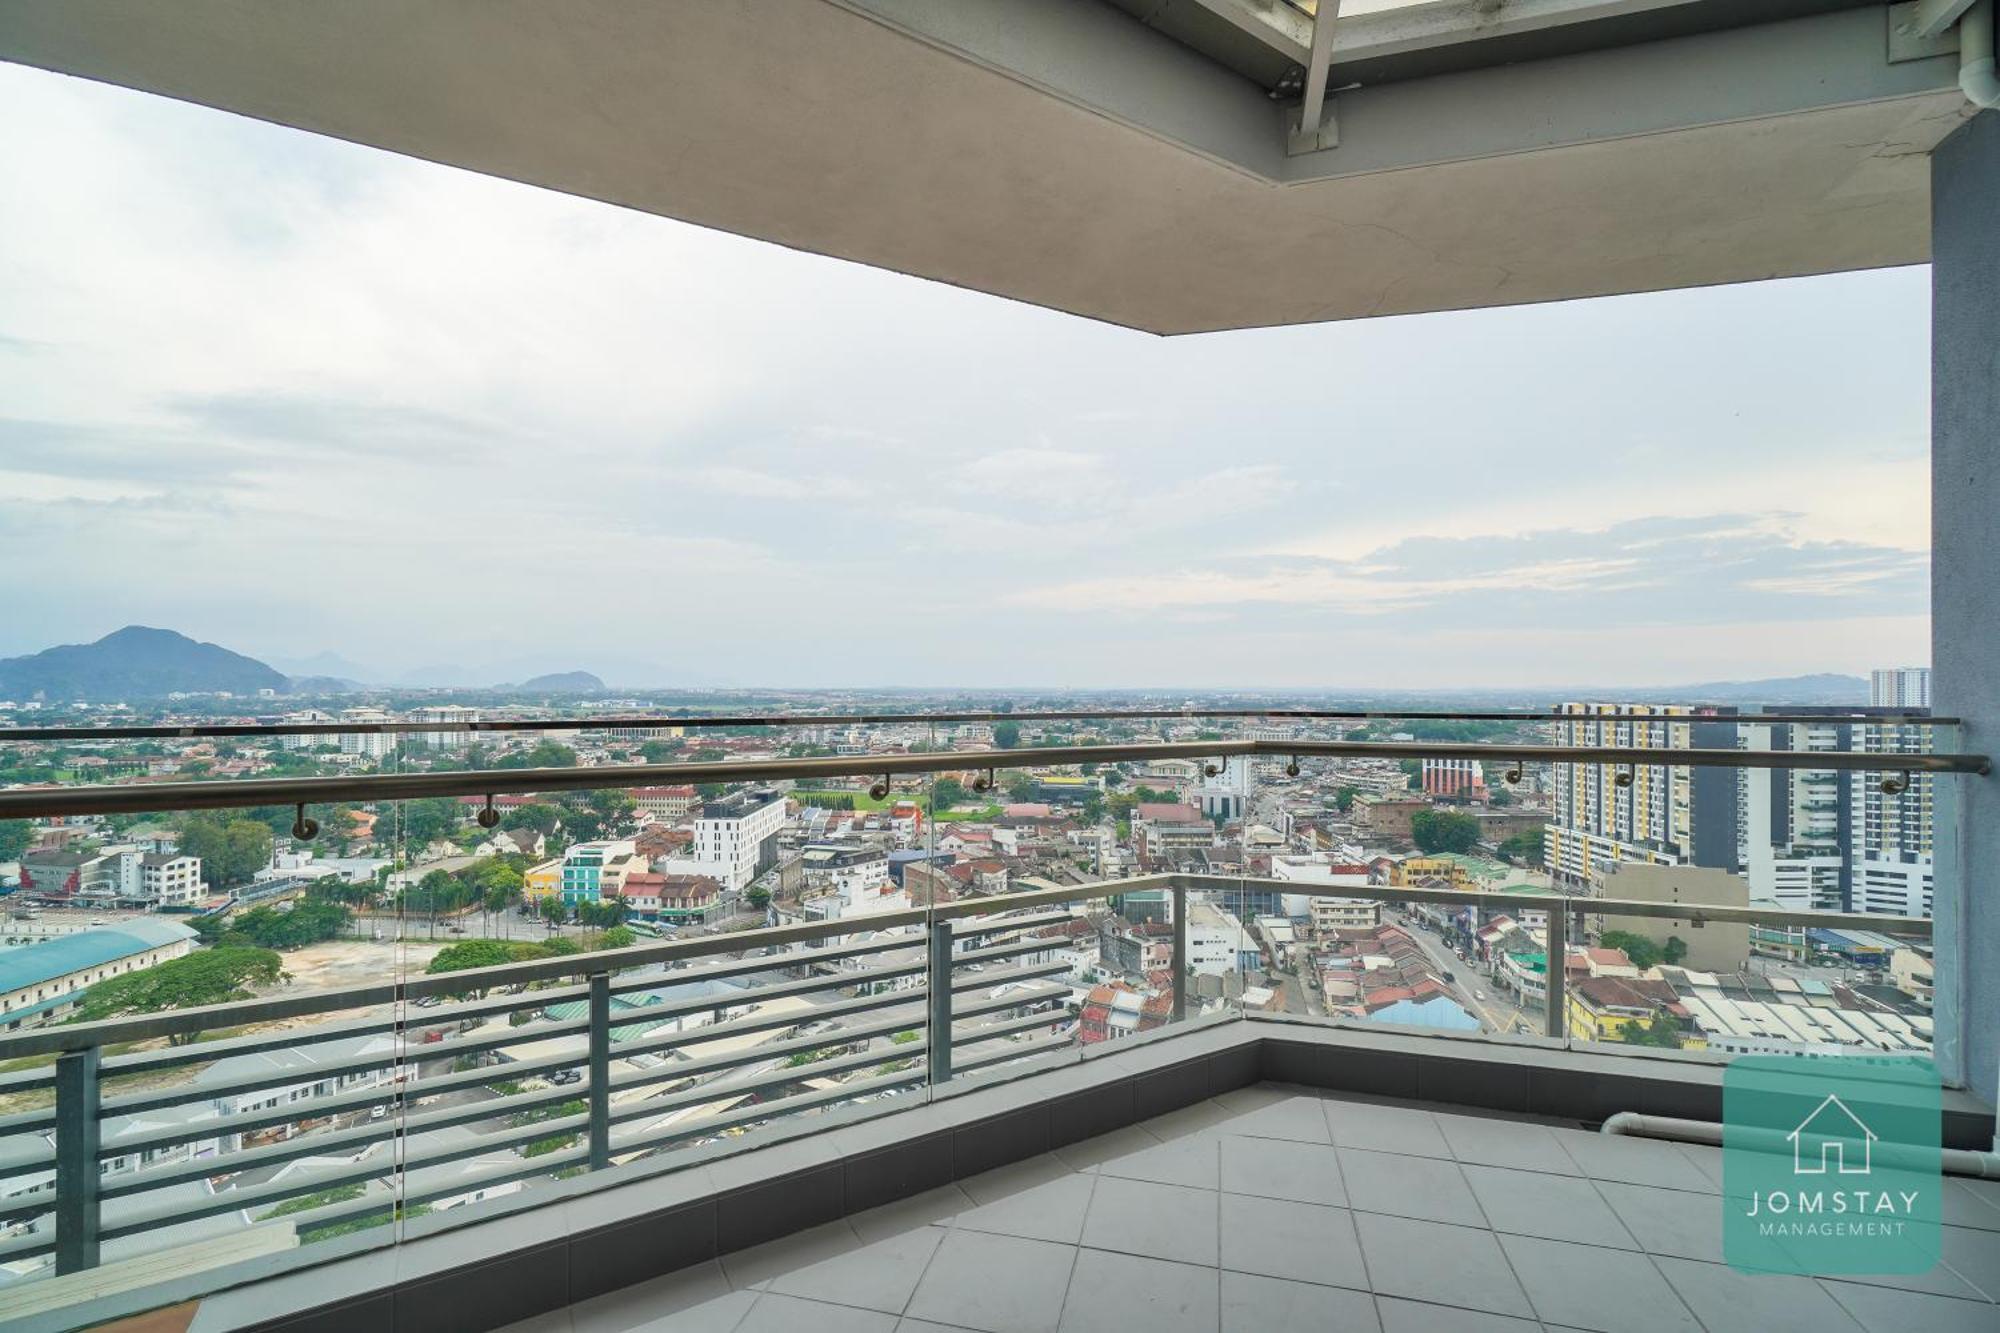 Jomstay Octagon Ipoh Suites 外观 照片